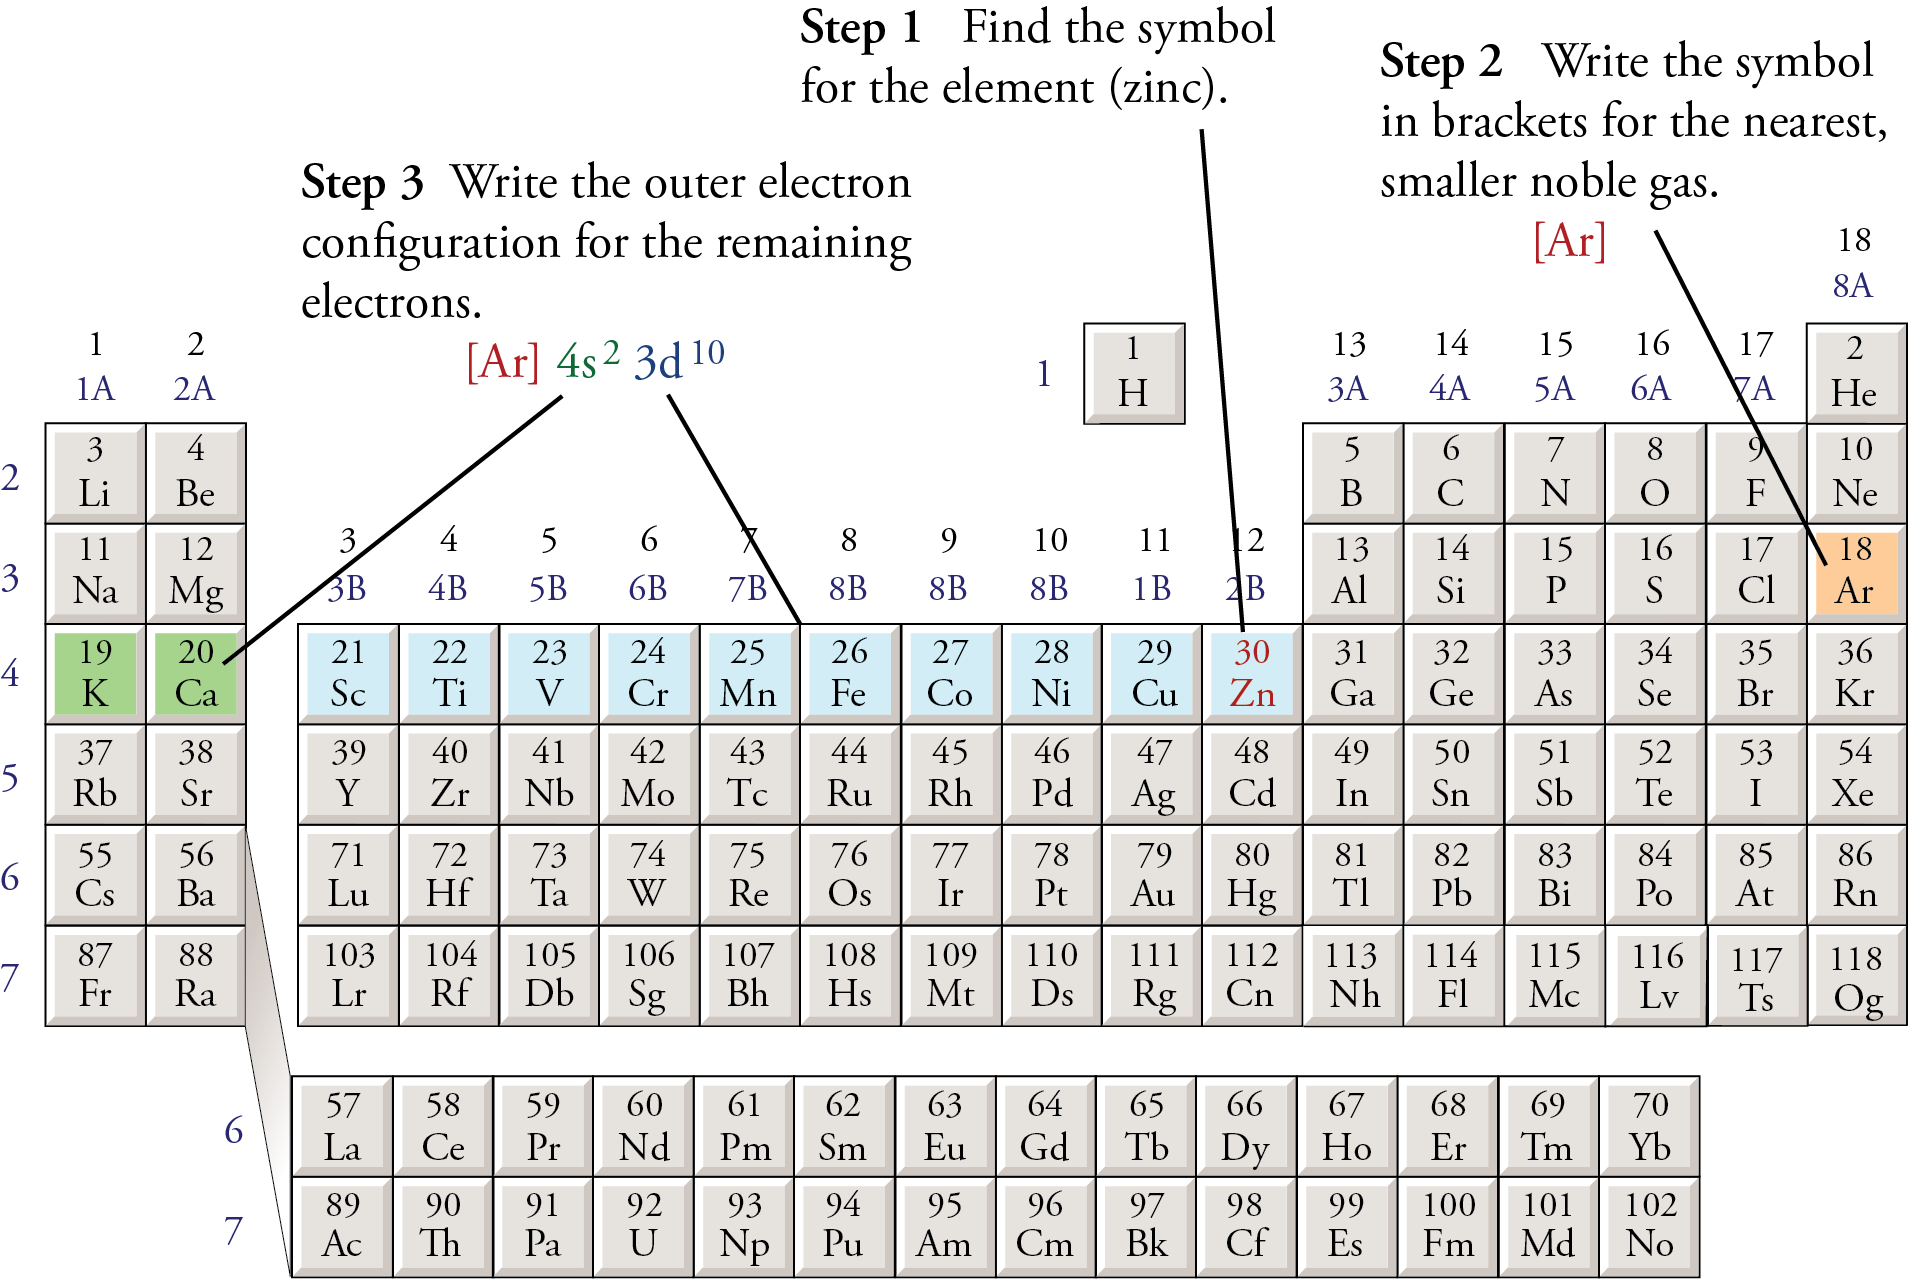 Image of the periodic table showing the way to get abbreviated electron configurations